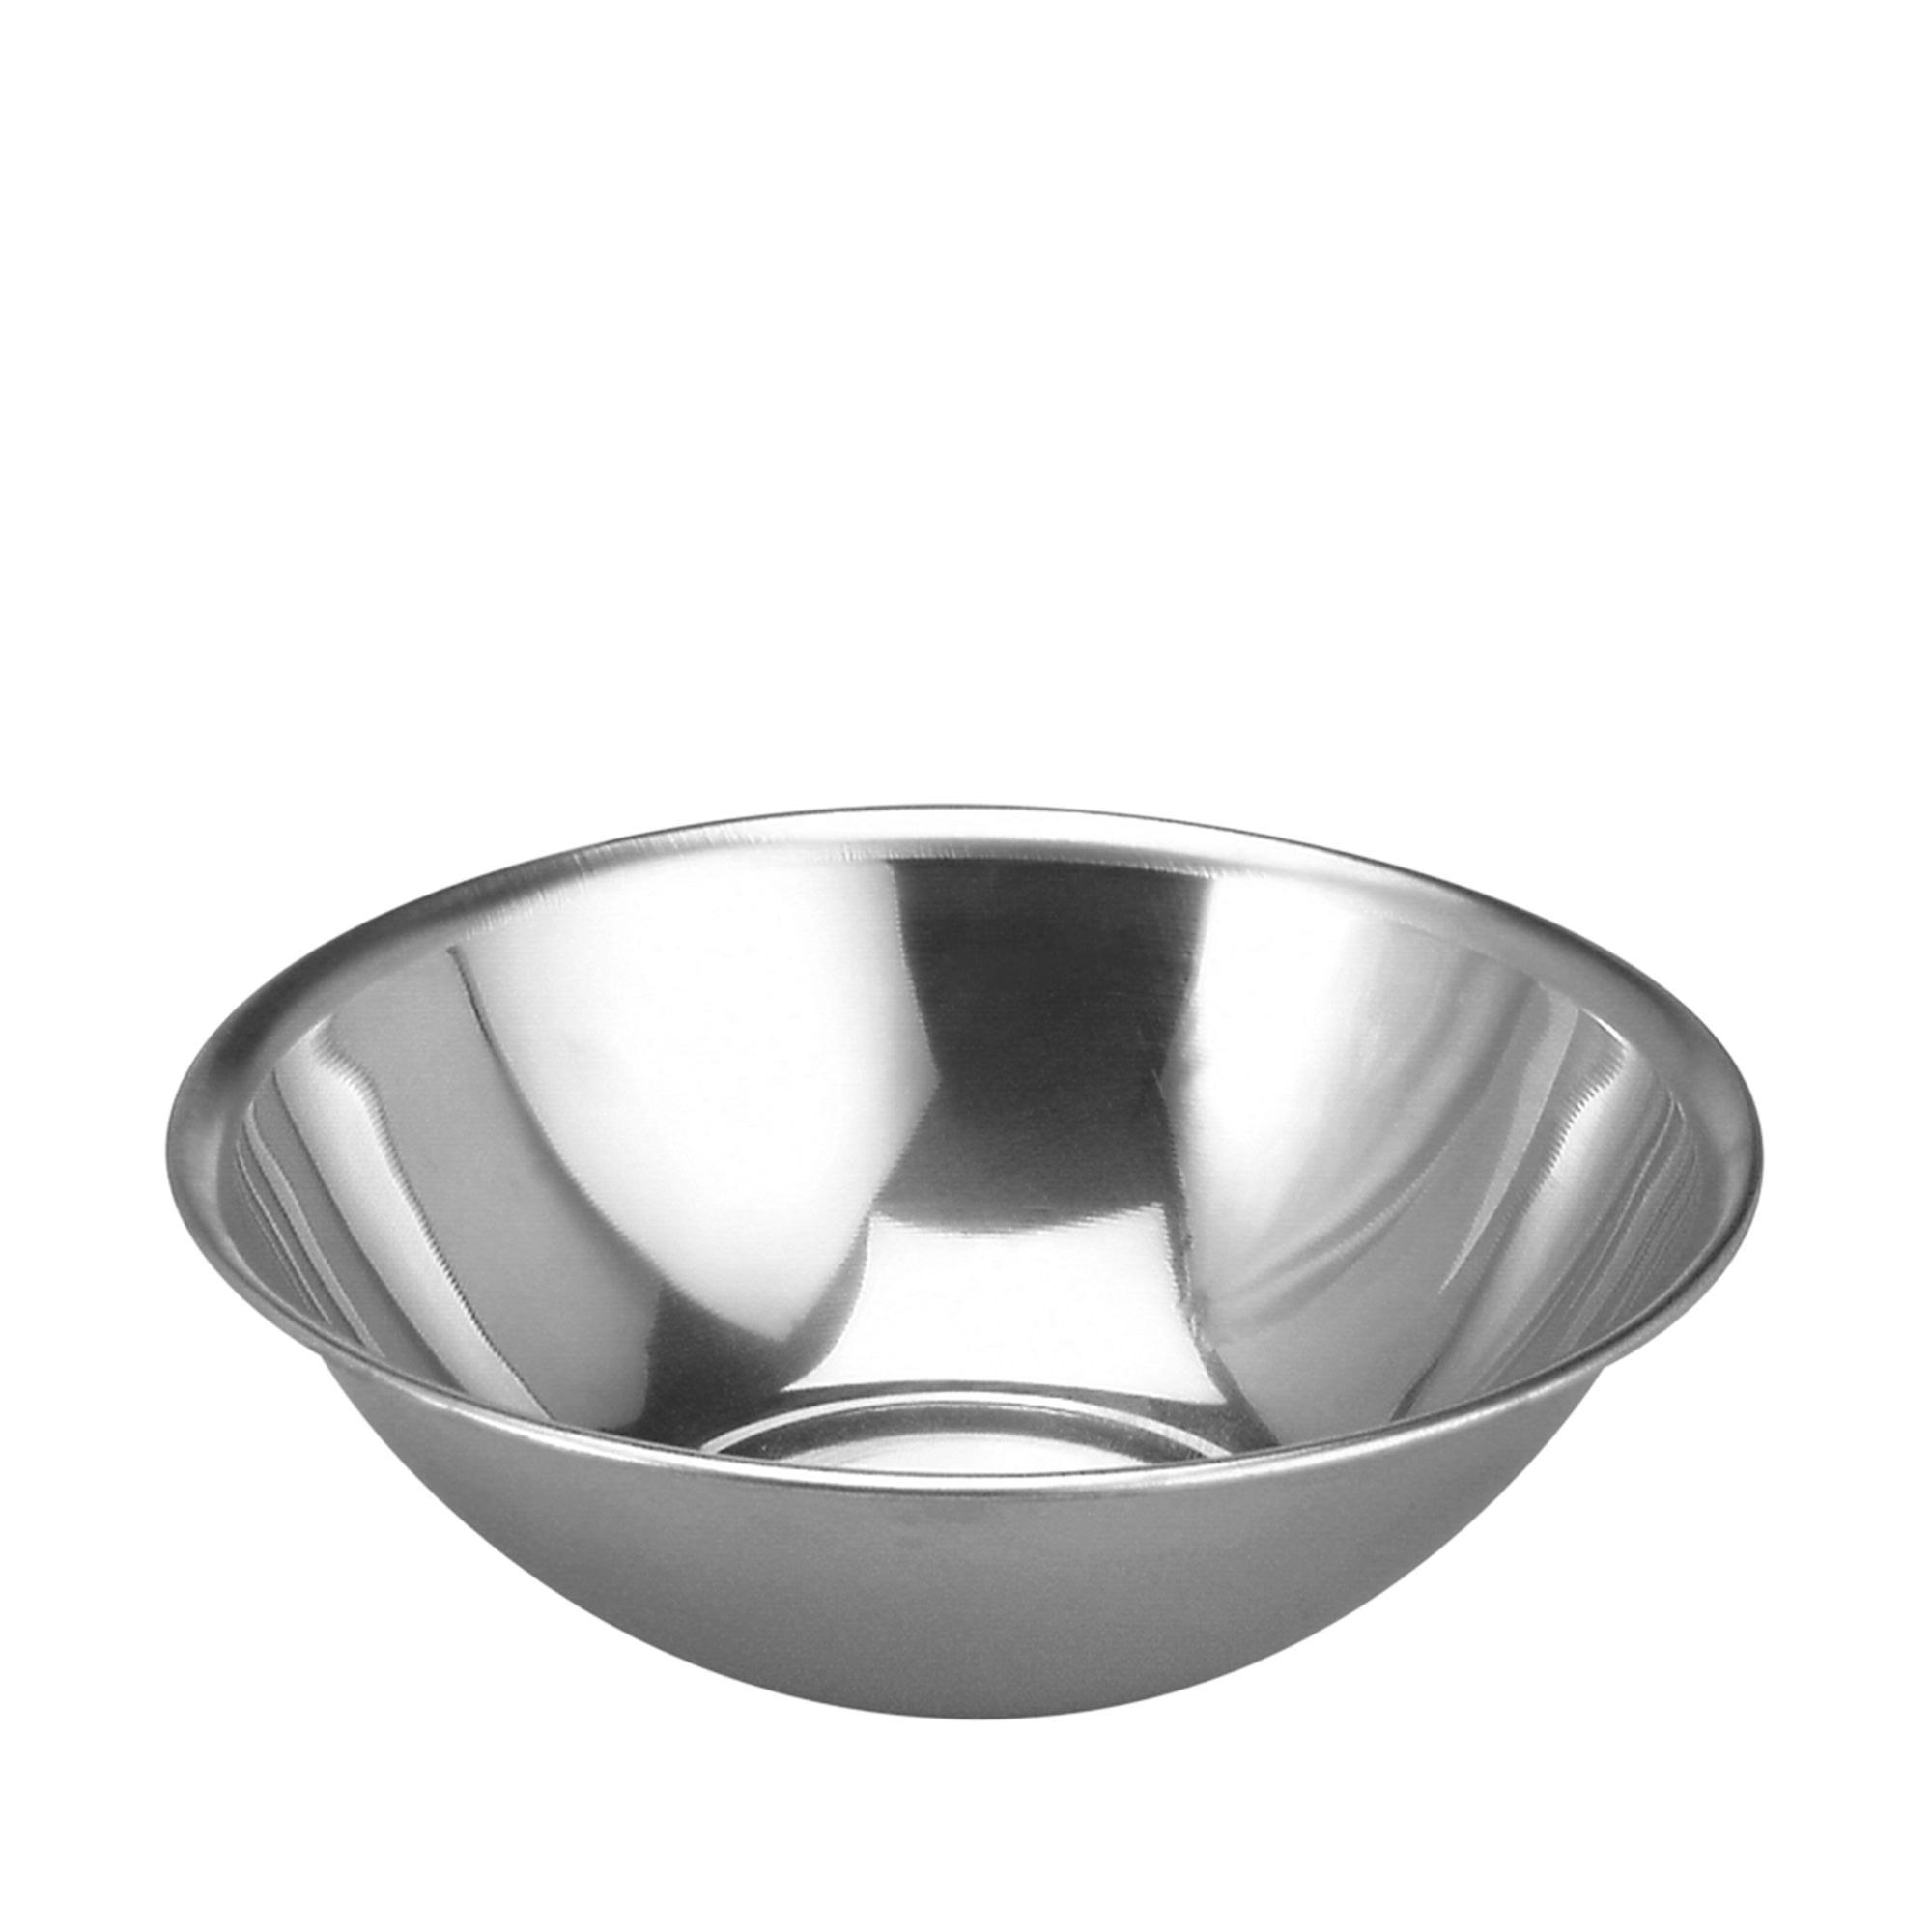 Chef Inox Stainless Steel Mixing Bowl 45cm - 13L Image 1